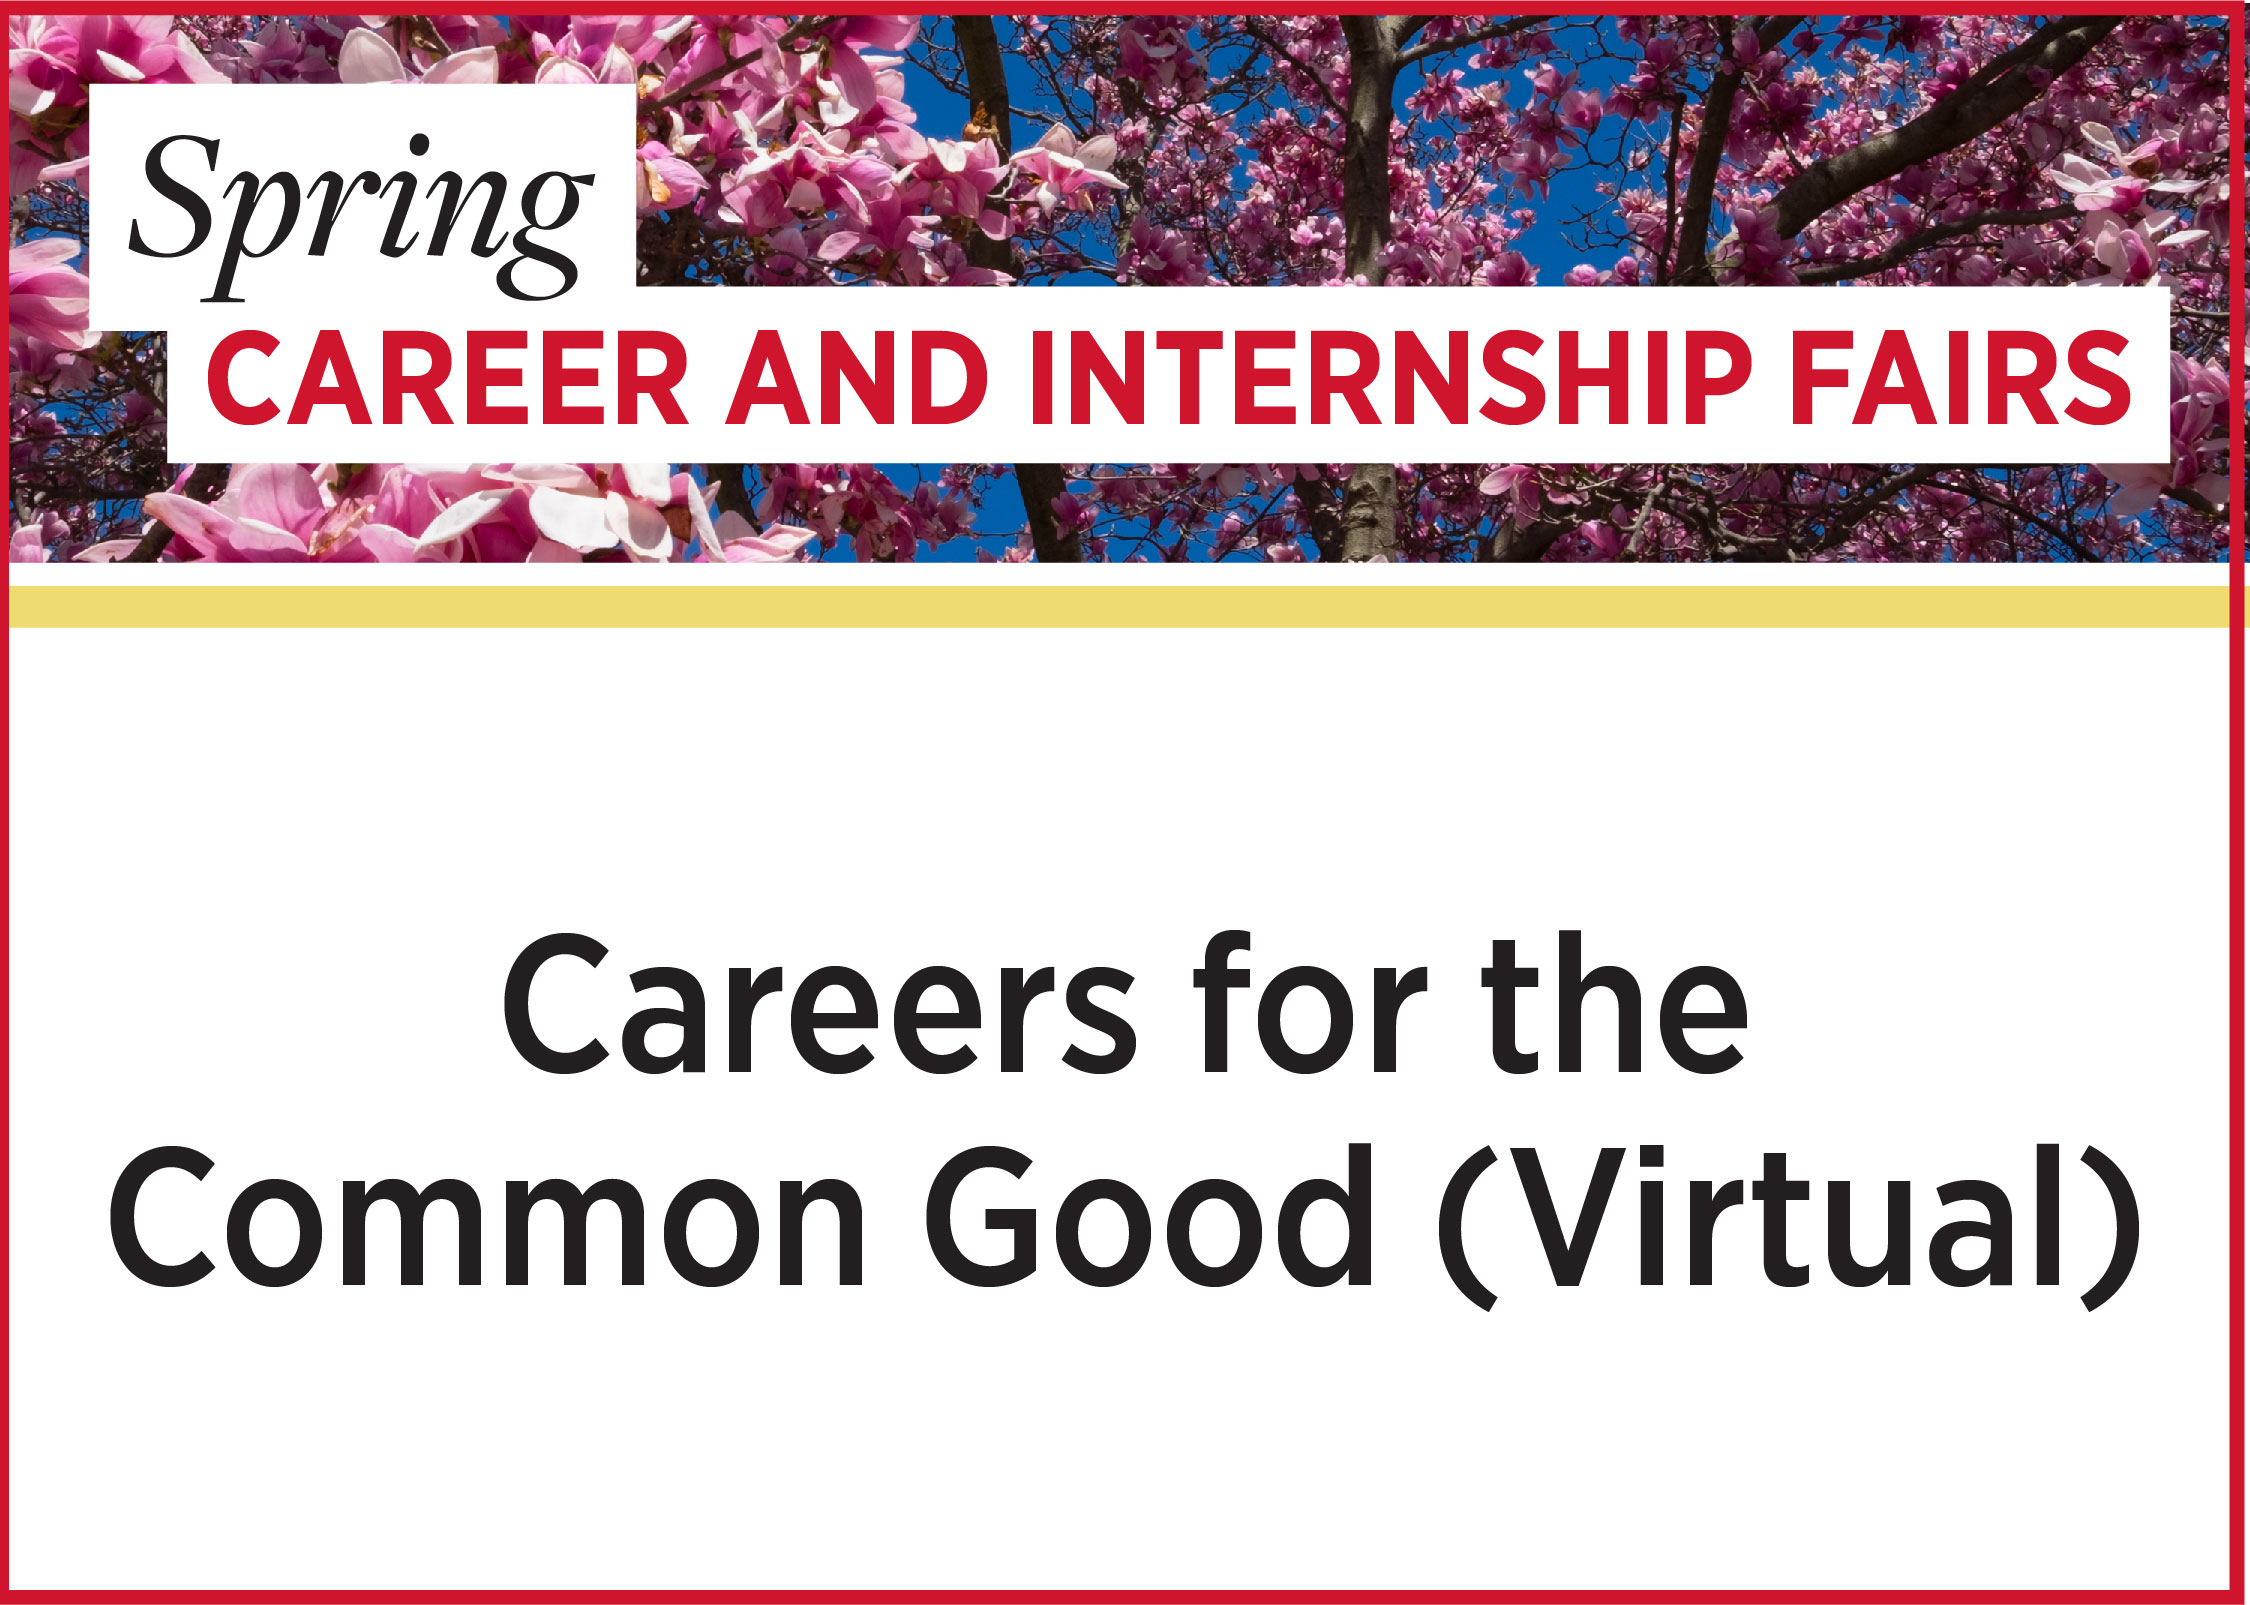 Spring Career and Internship Fairs - Careers for the Common Good (Virtual)